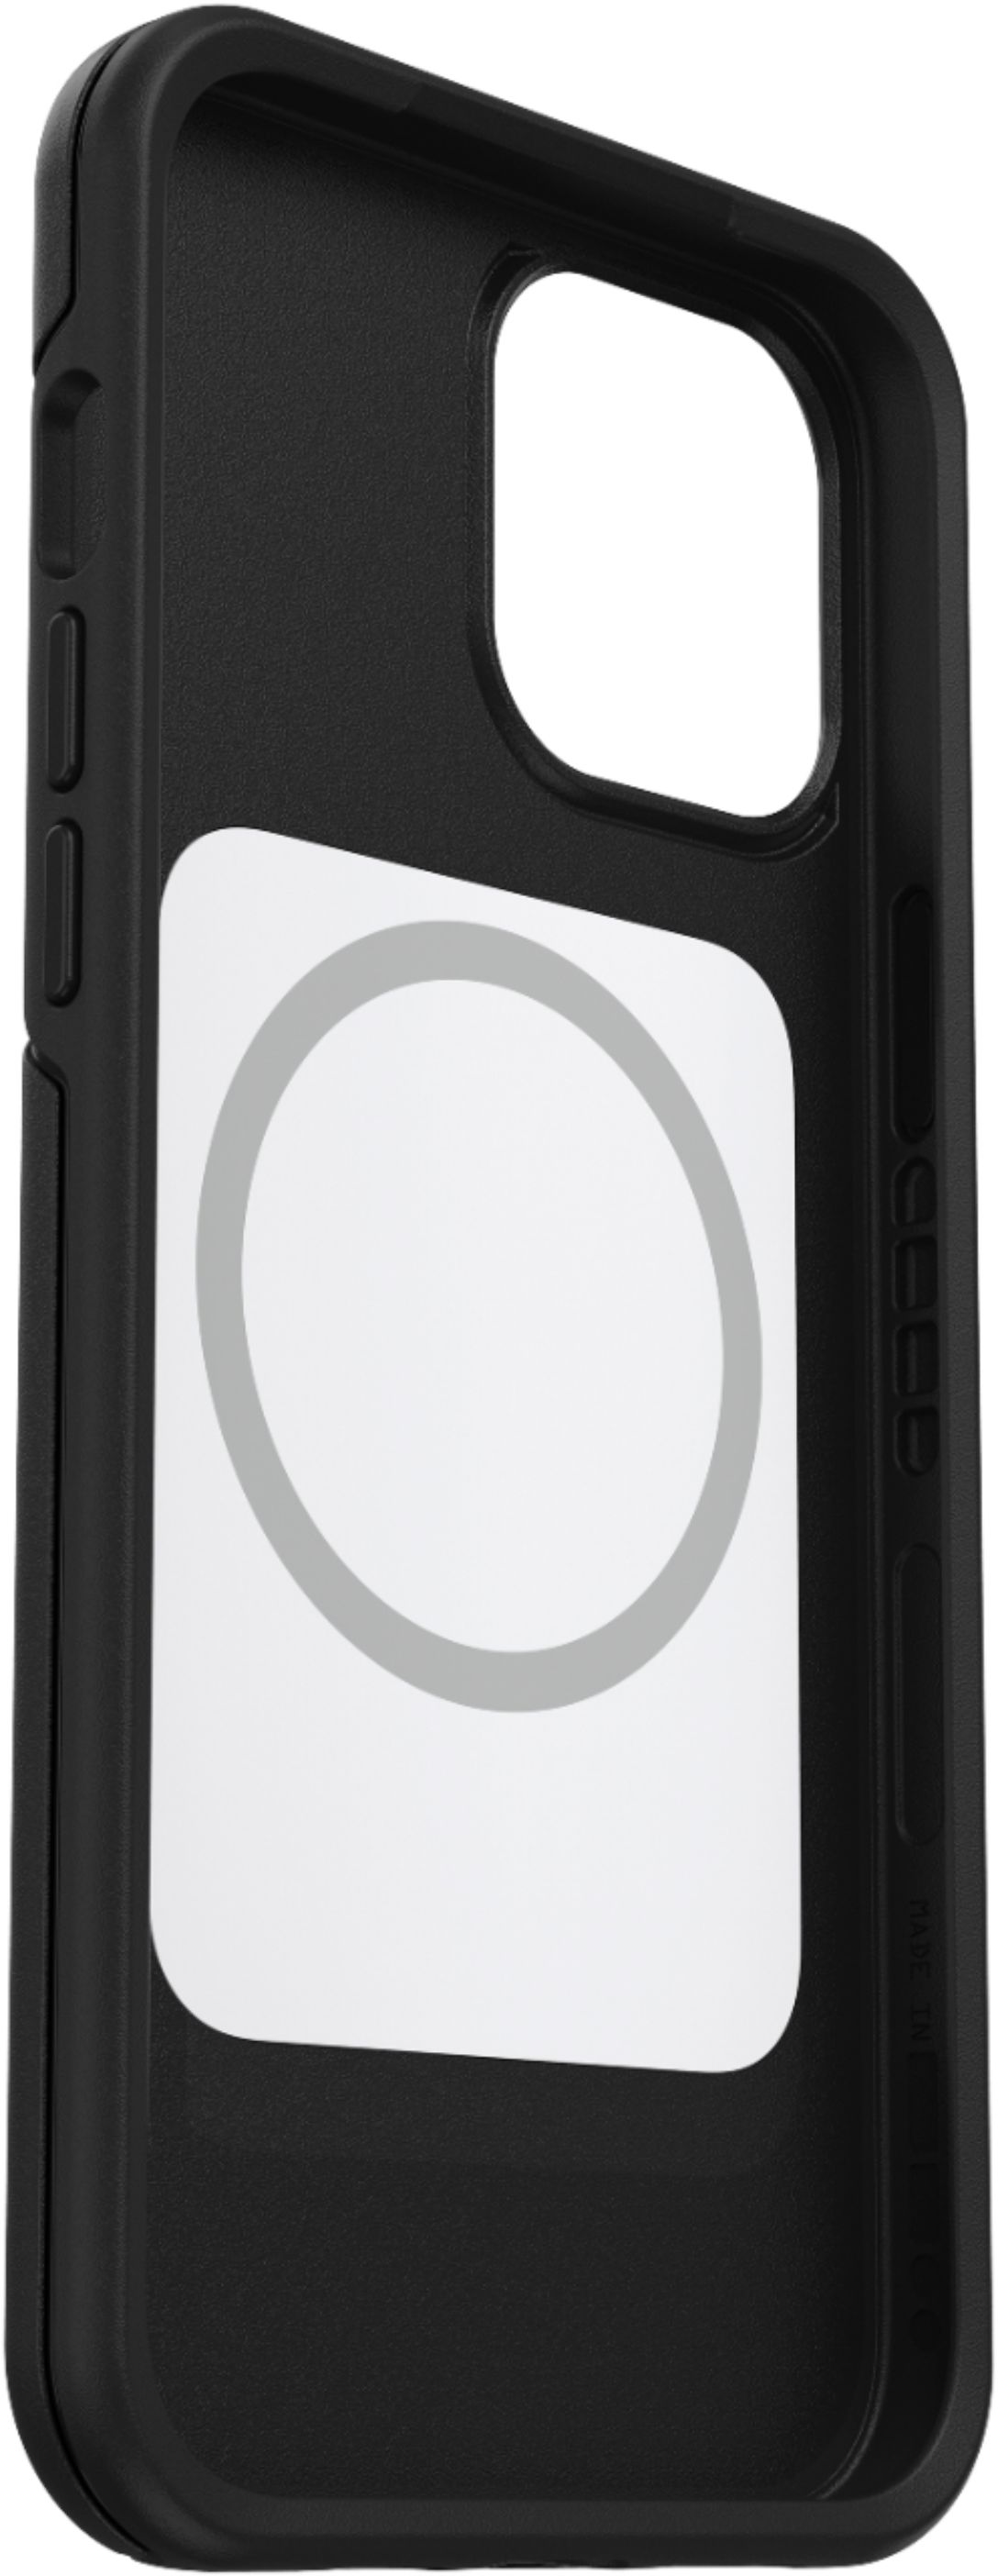 Otterbox Symmetry Series With Magsafe Carrying Case For Apple Iphone 12 Pro Max Black Big Apple Buddy